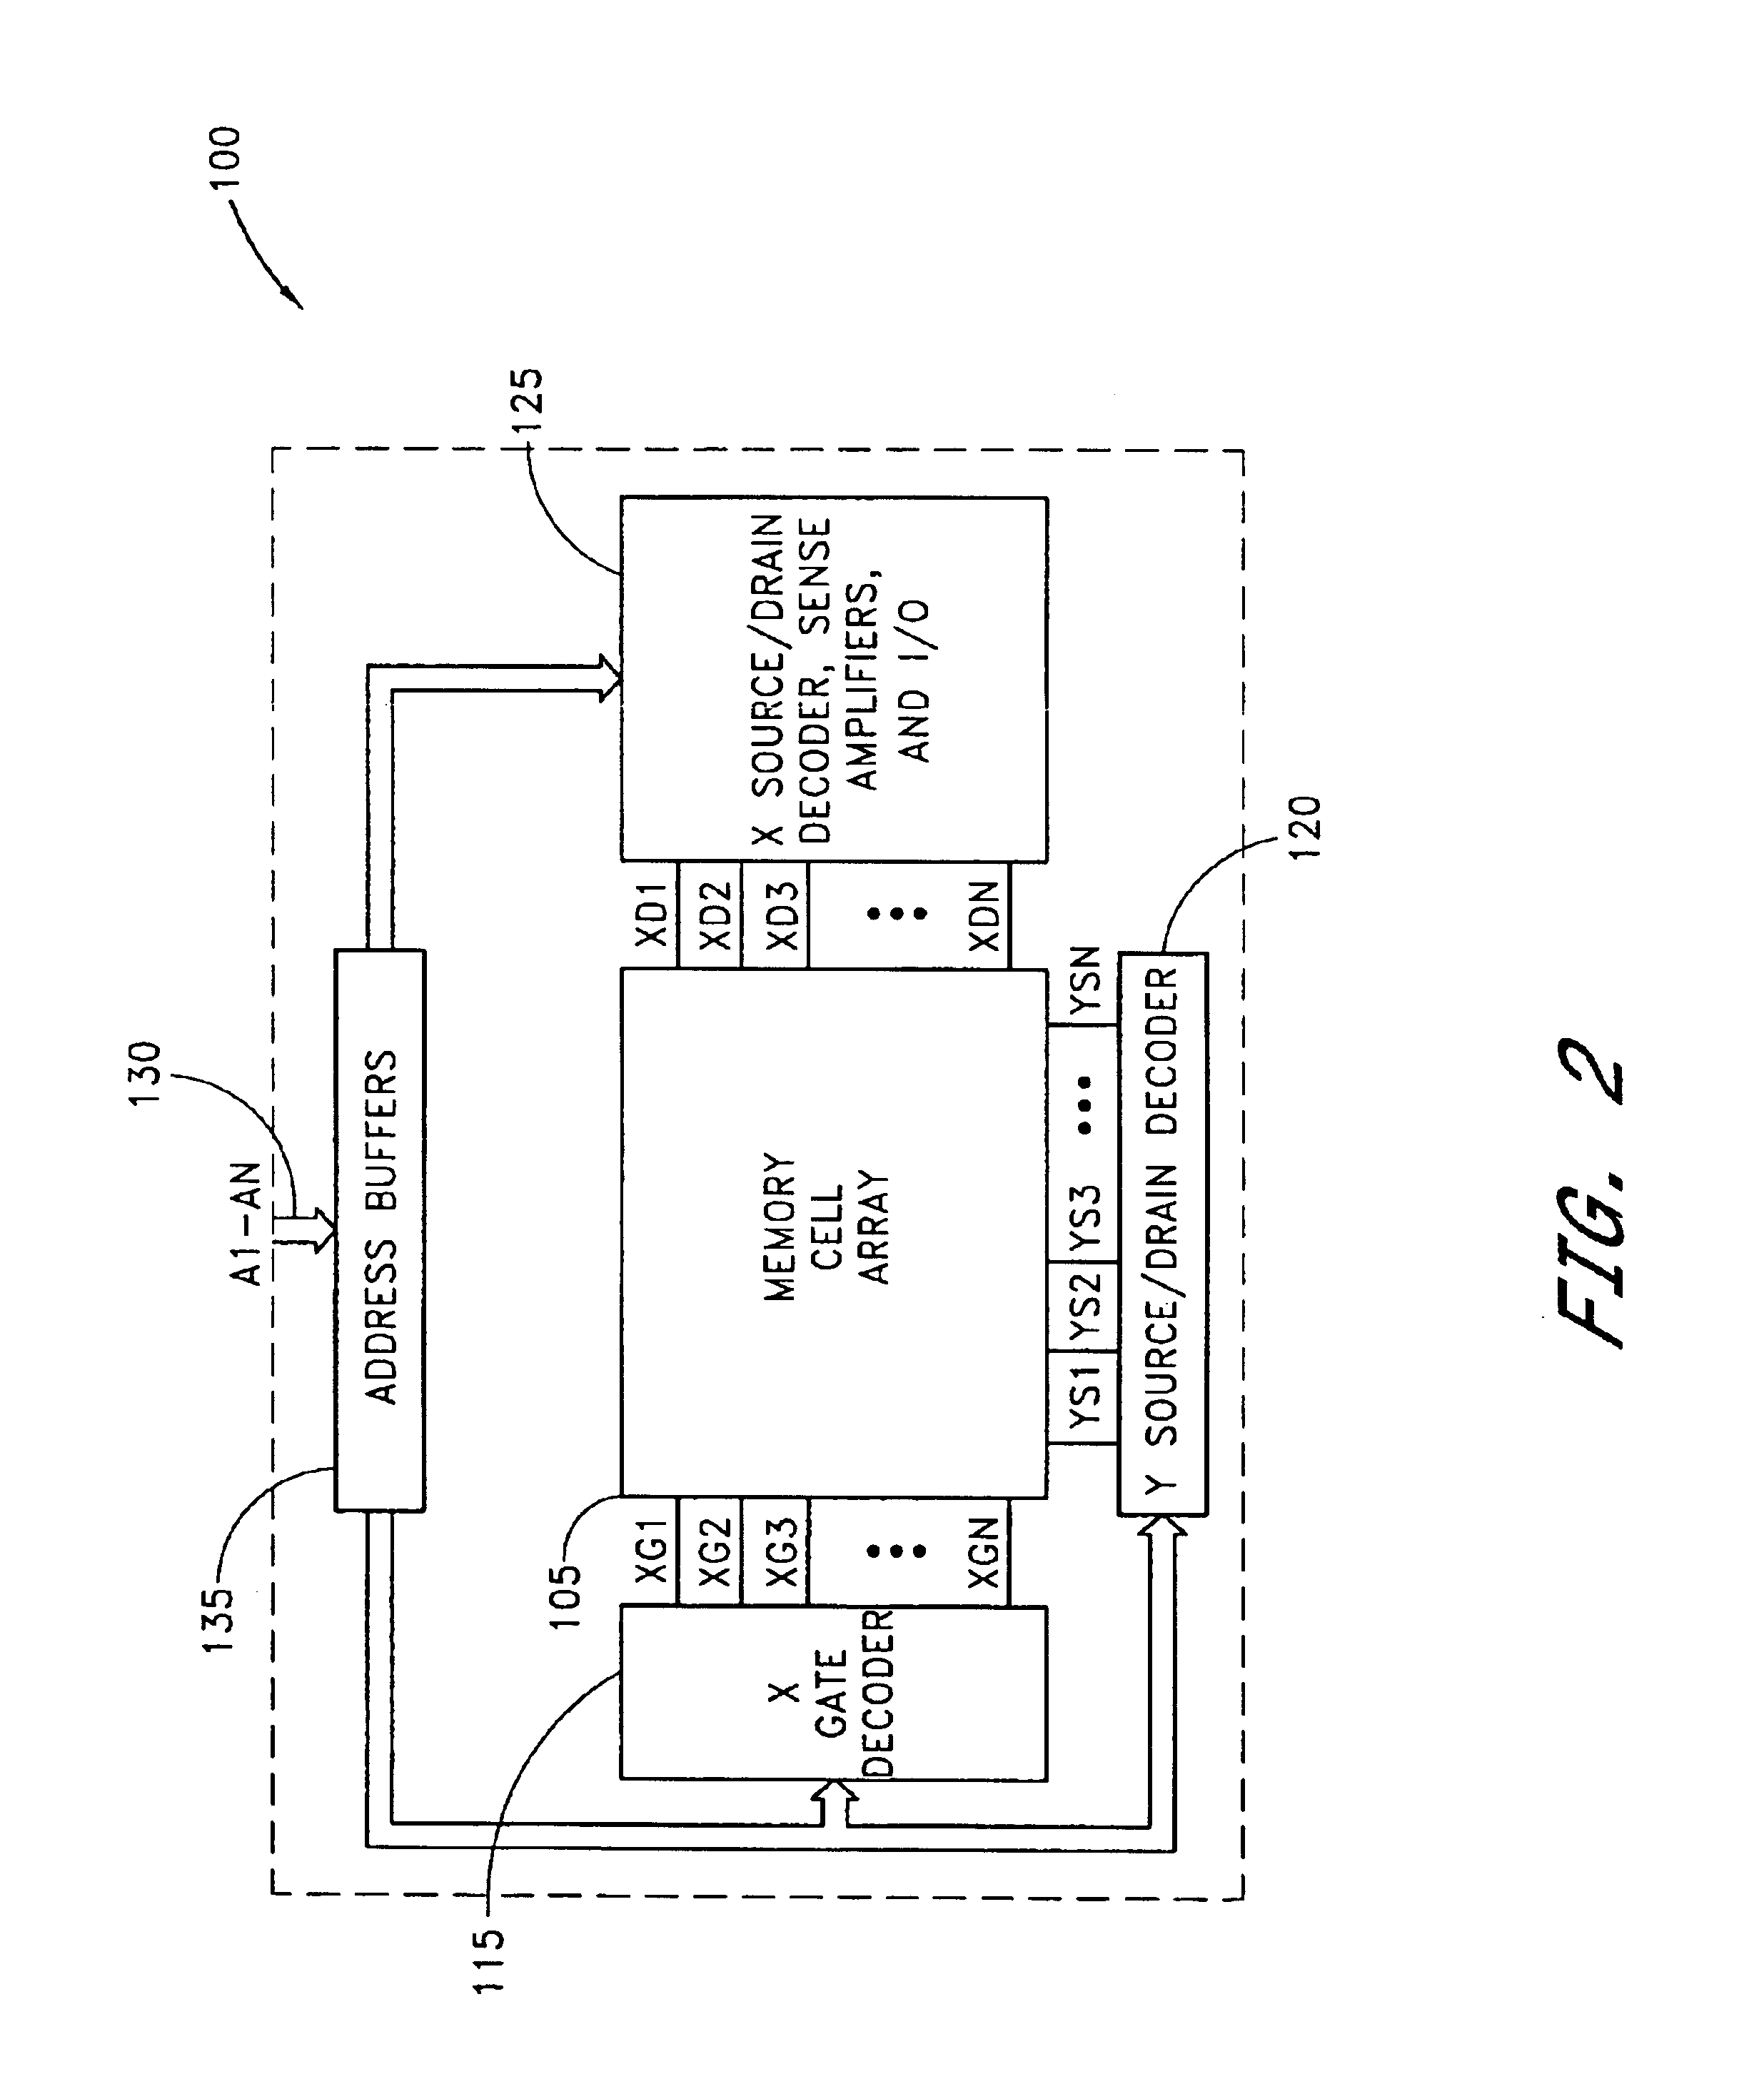 Floating gate transistor with horizontal gate layers stacked next to vertical body